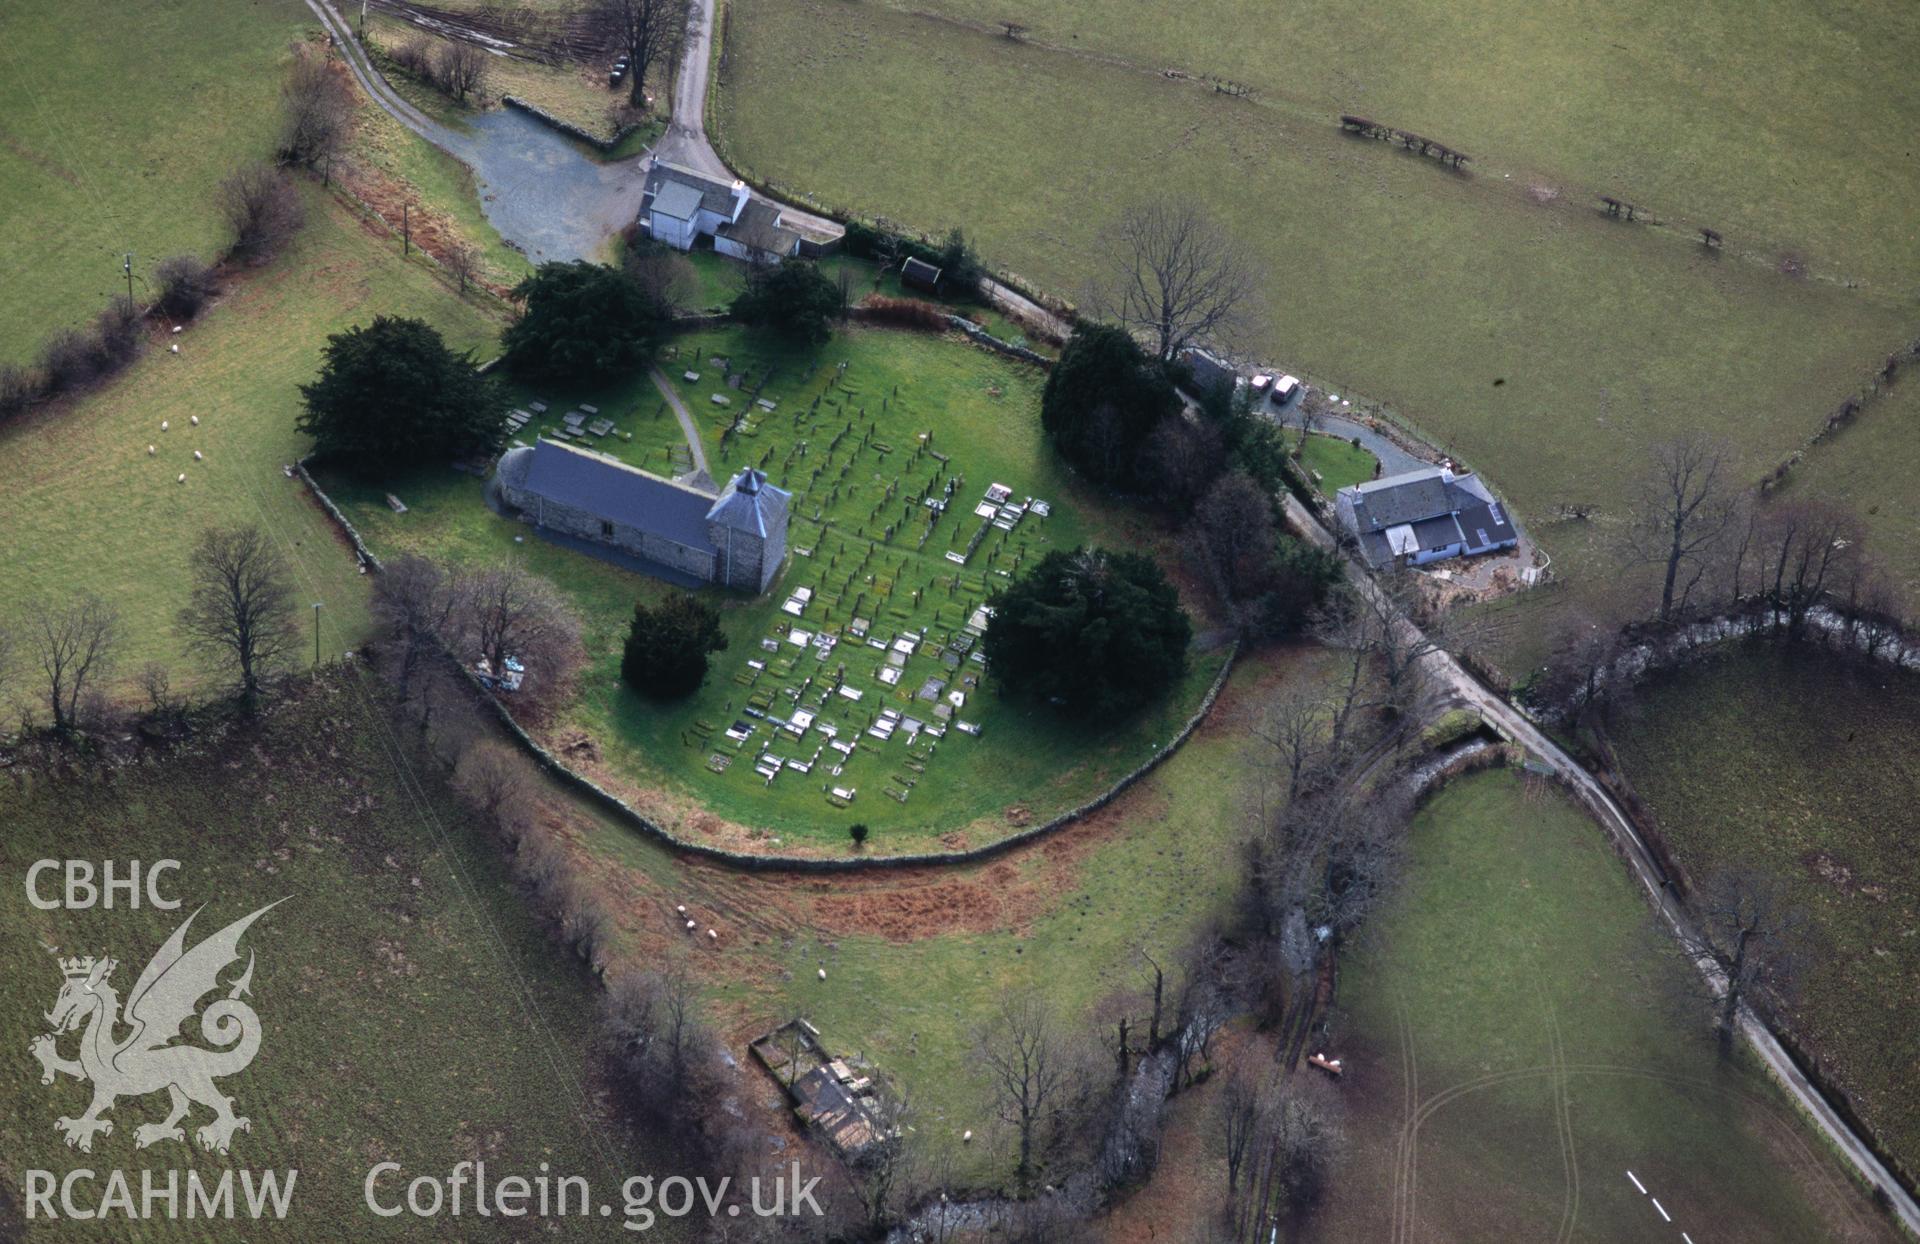 RCAHMW colour oblique aerial photograph of St Melangell' s Church, Pennant Melangell taken on 13/03/1995 by C.R. Musson